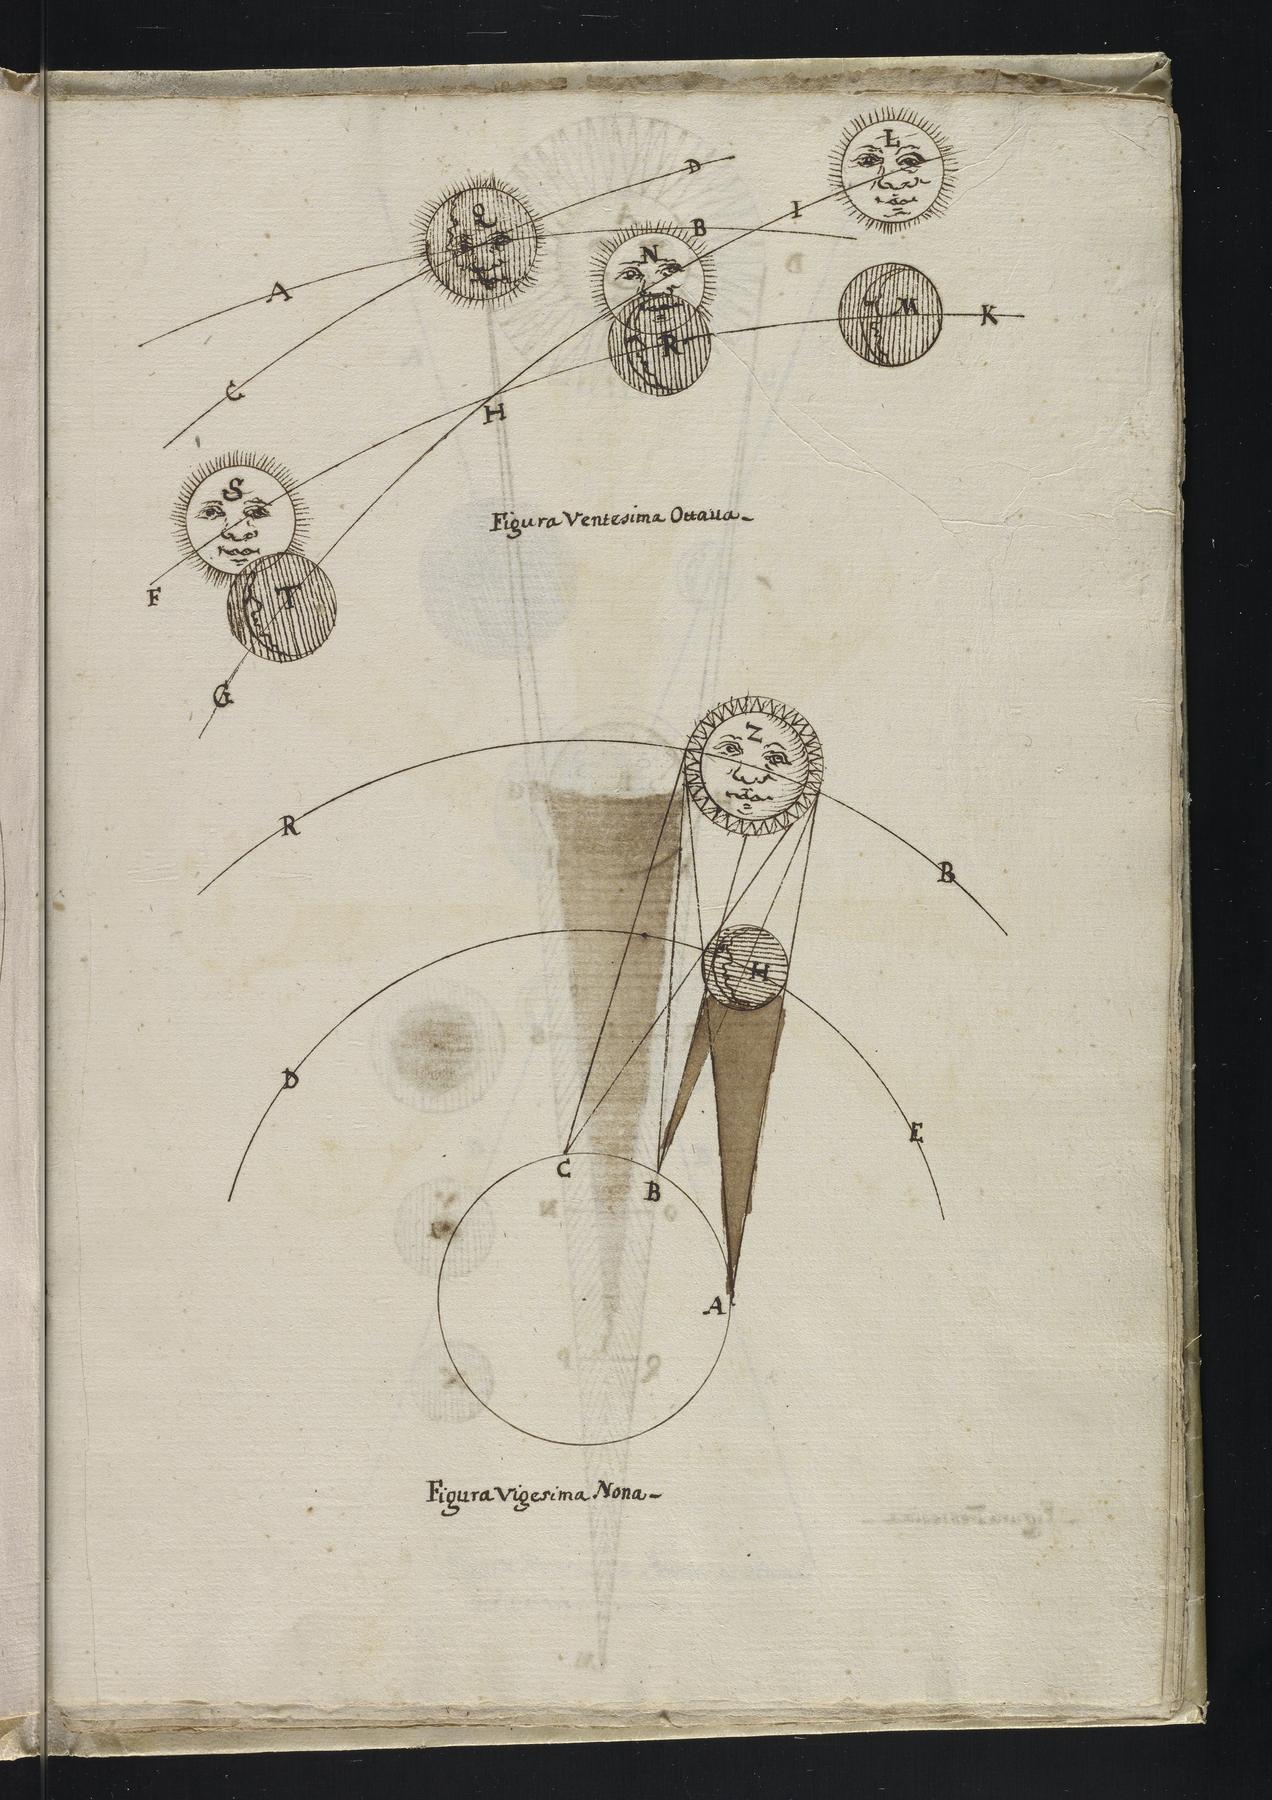 An eclipse diagram from a 17th century book. The suns have little faces